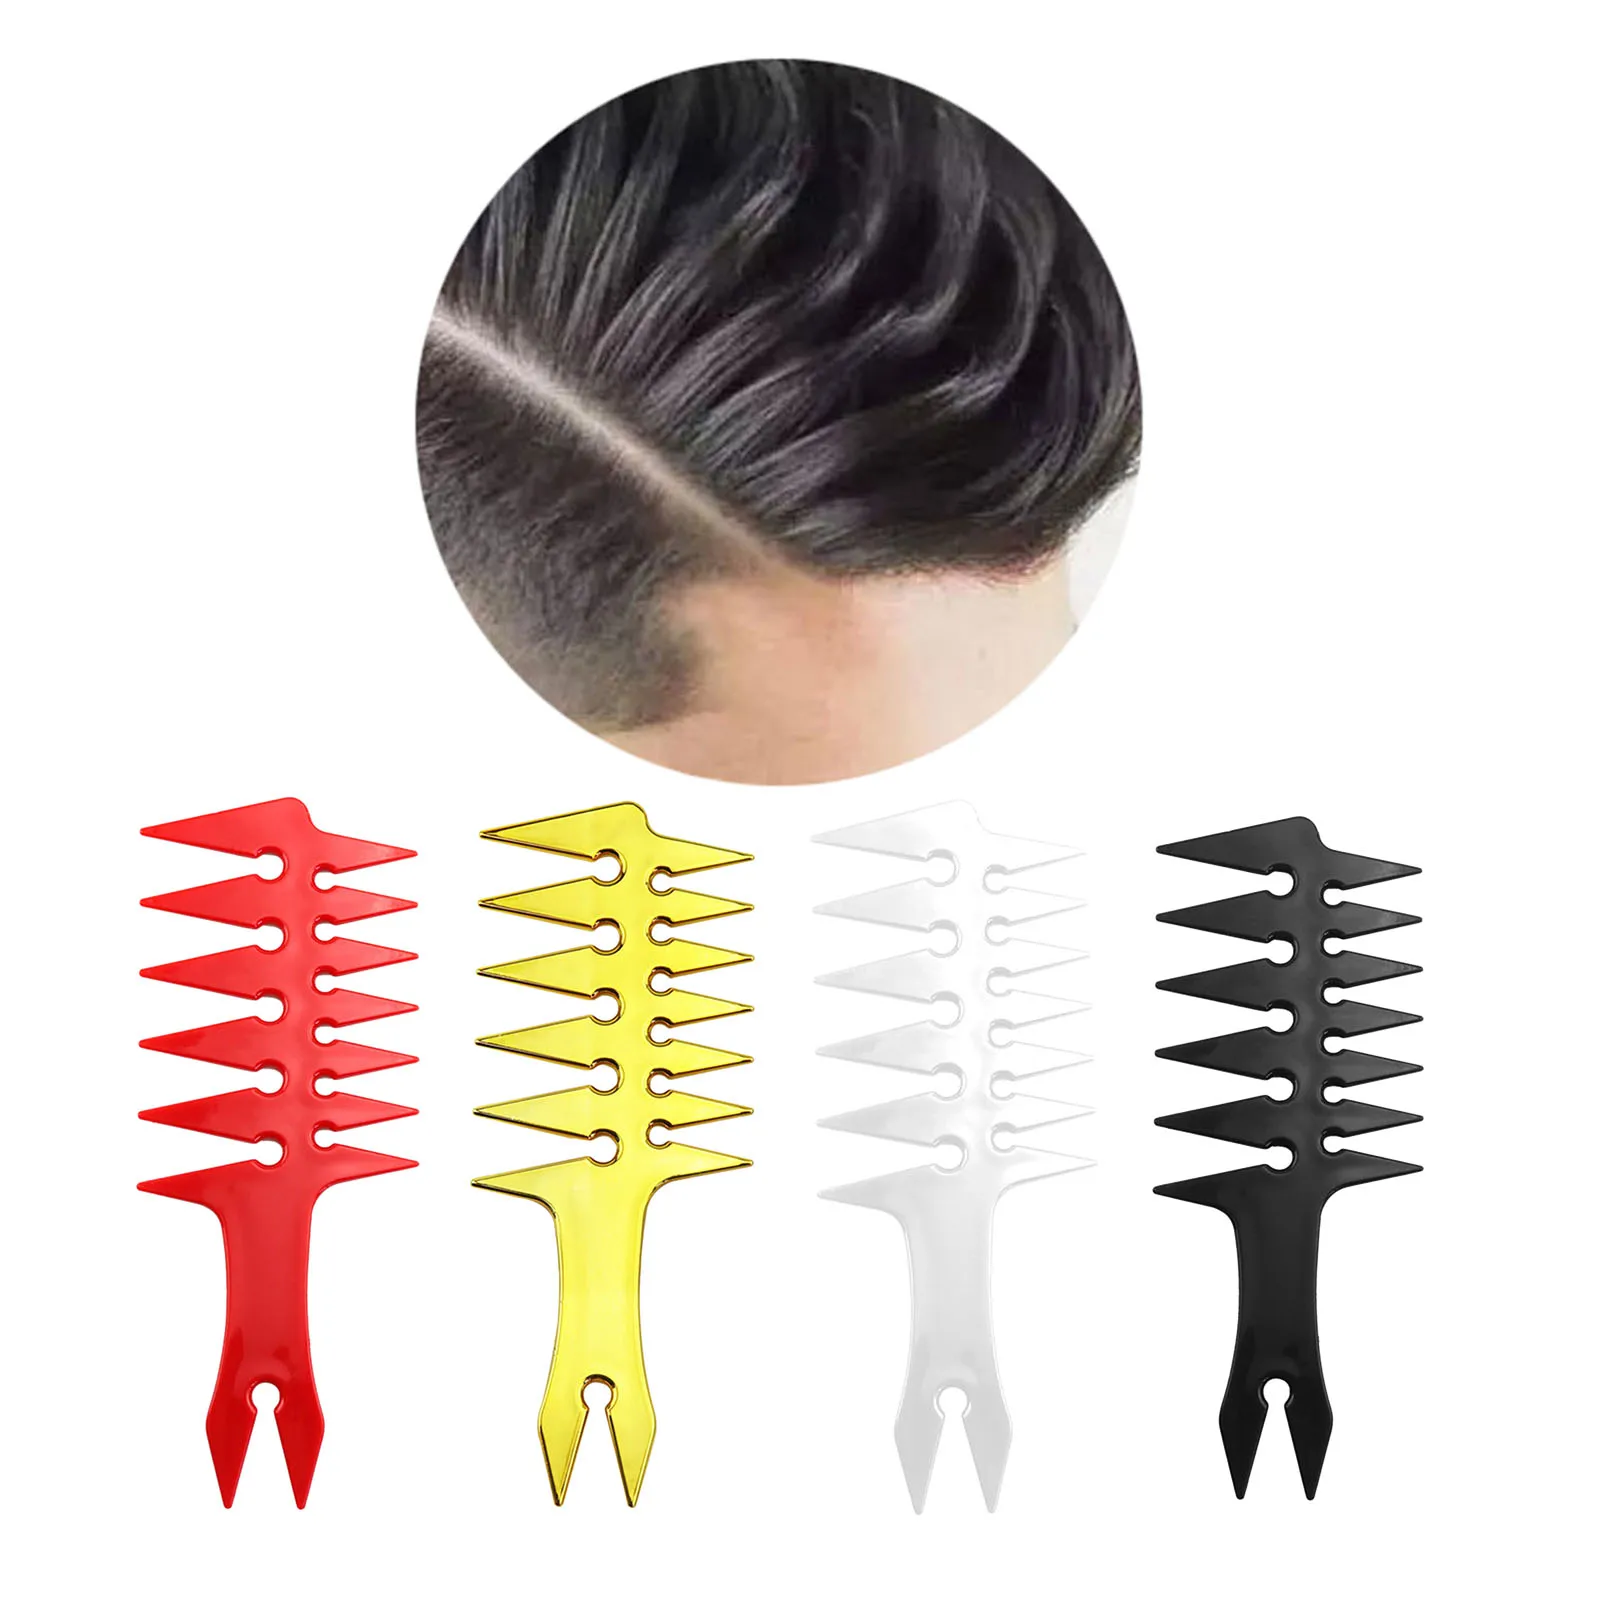 Men`s Oil Head Comb Gold Wide Tooth Fork Comb Black Large Tooth Hair Styling Comb  Detangling Curly Hair Comb Hairdressing